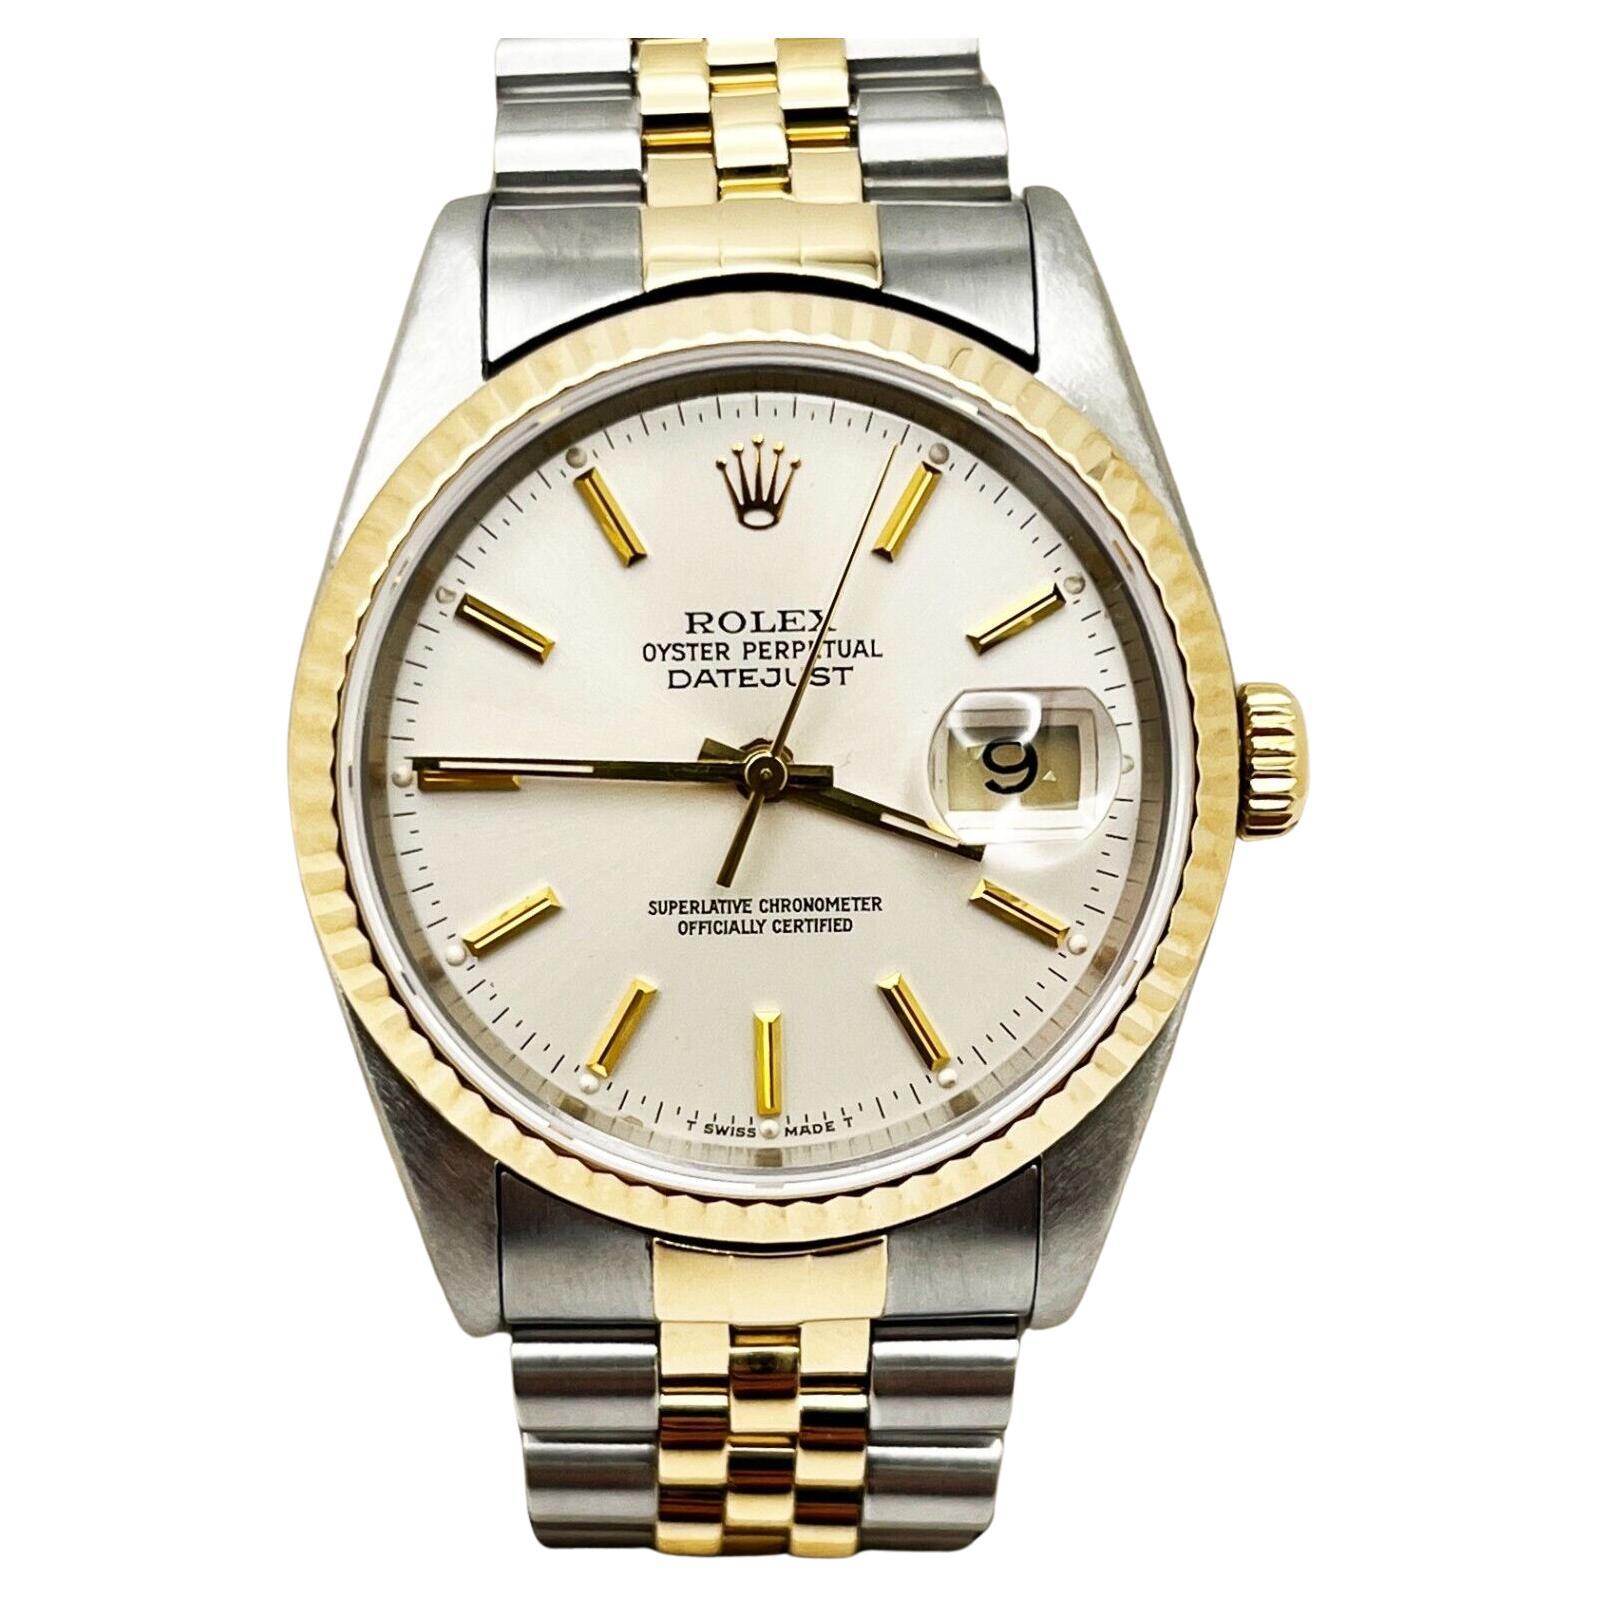 Rolex 16233 Datejust Silver Dial 18K Gold and Stainless Steel For Sale